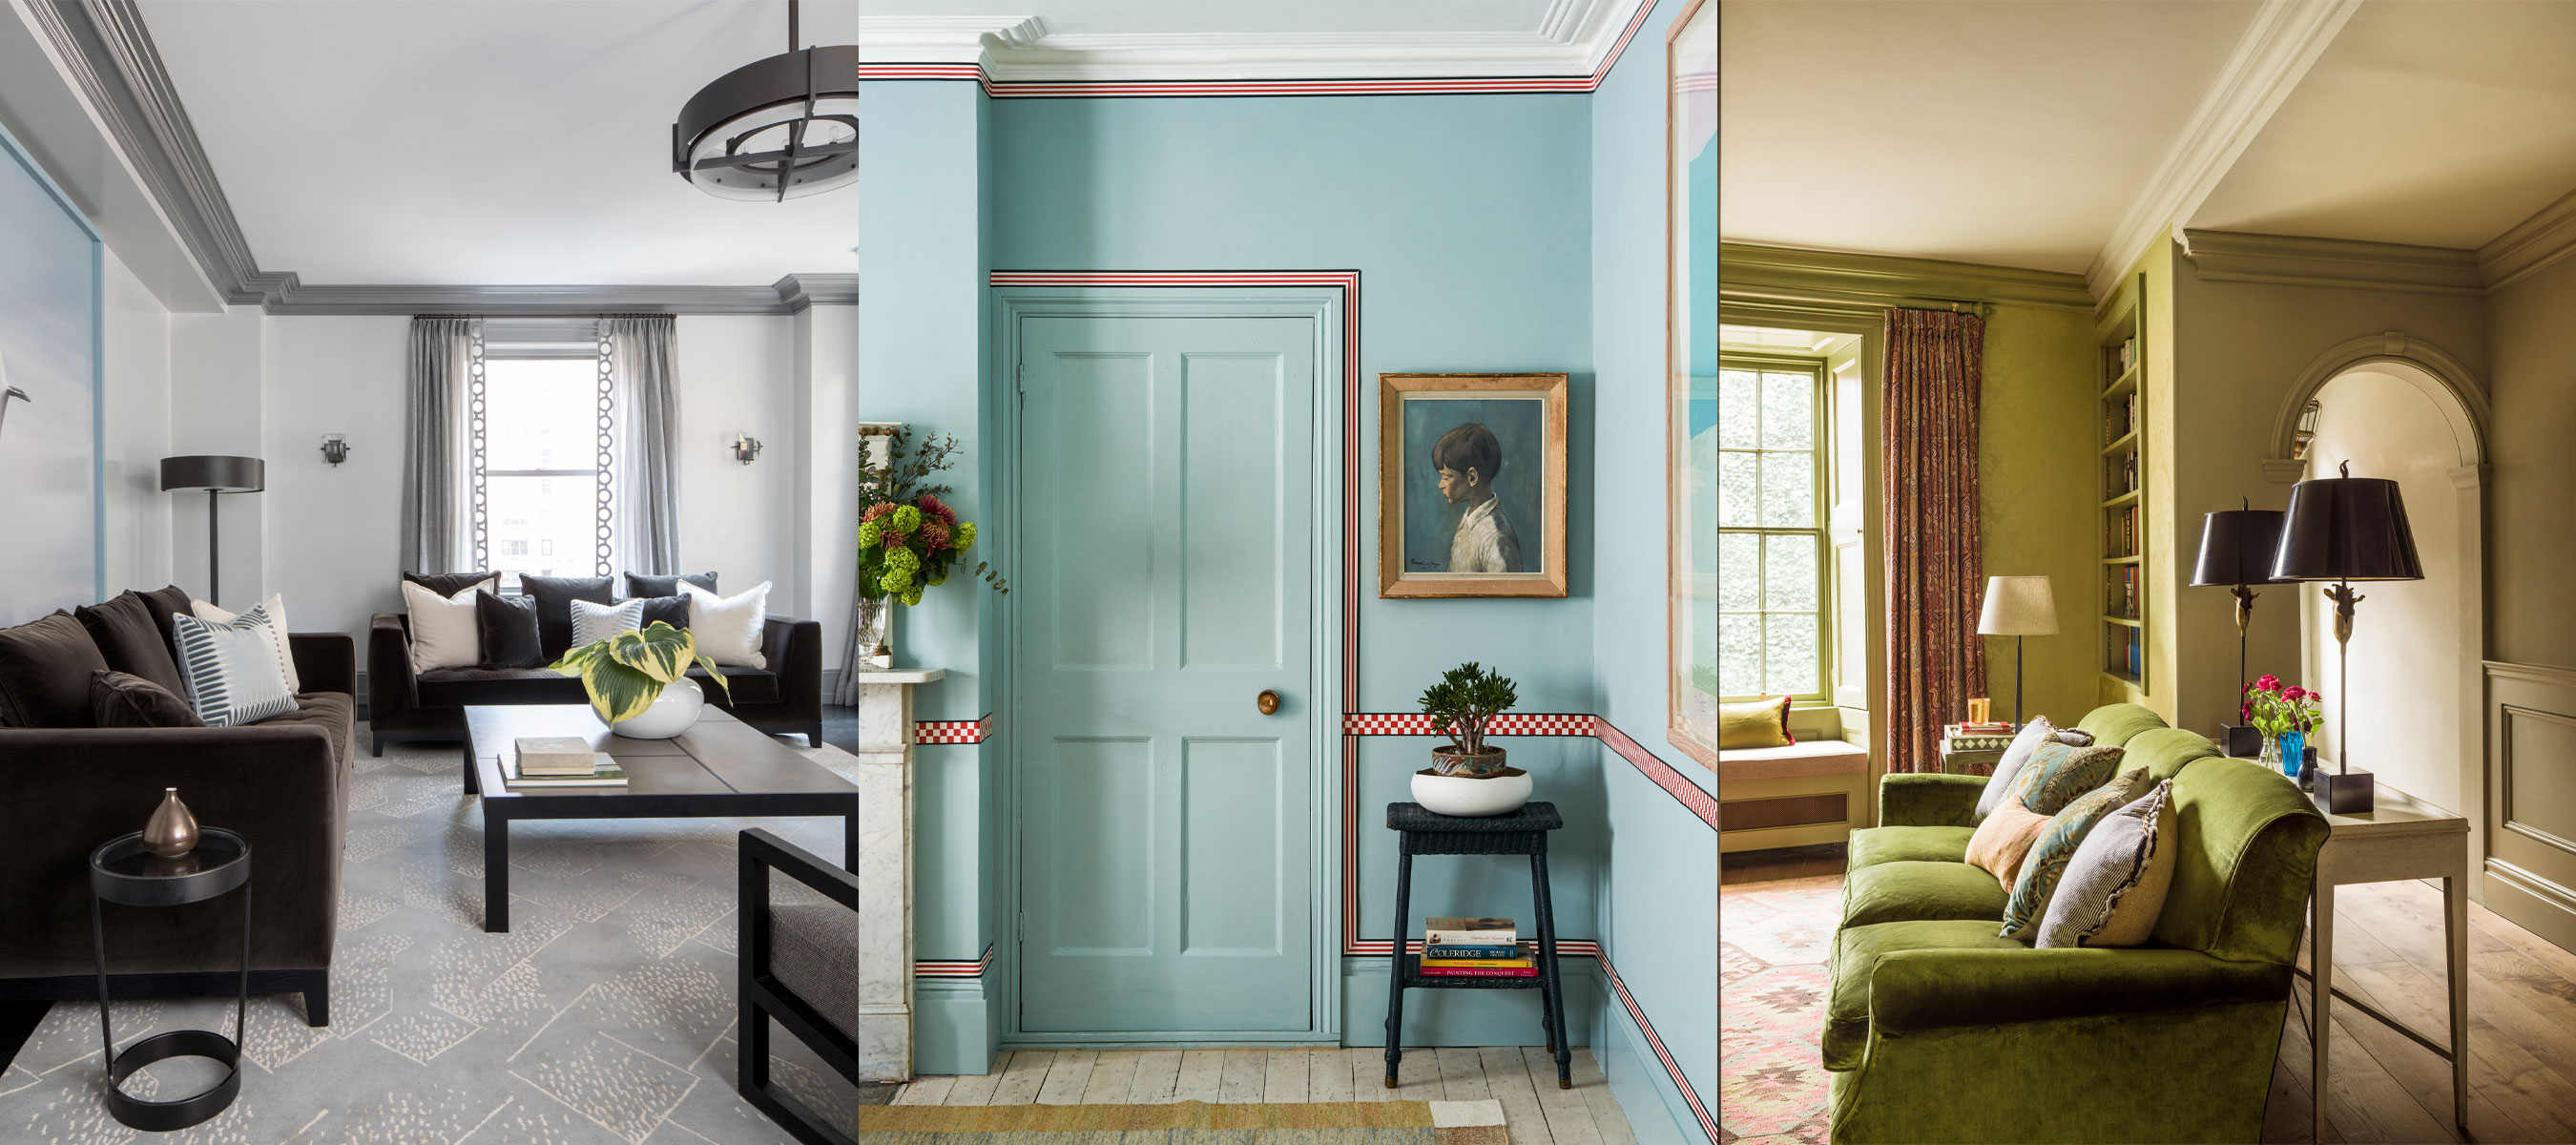 Ceiling Trim Ideas: 12 Ways To Enhance This Architectural Feature |